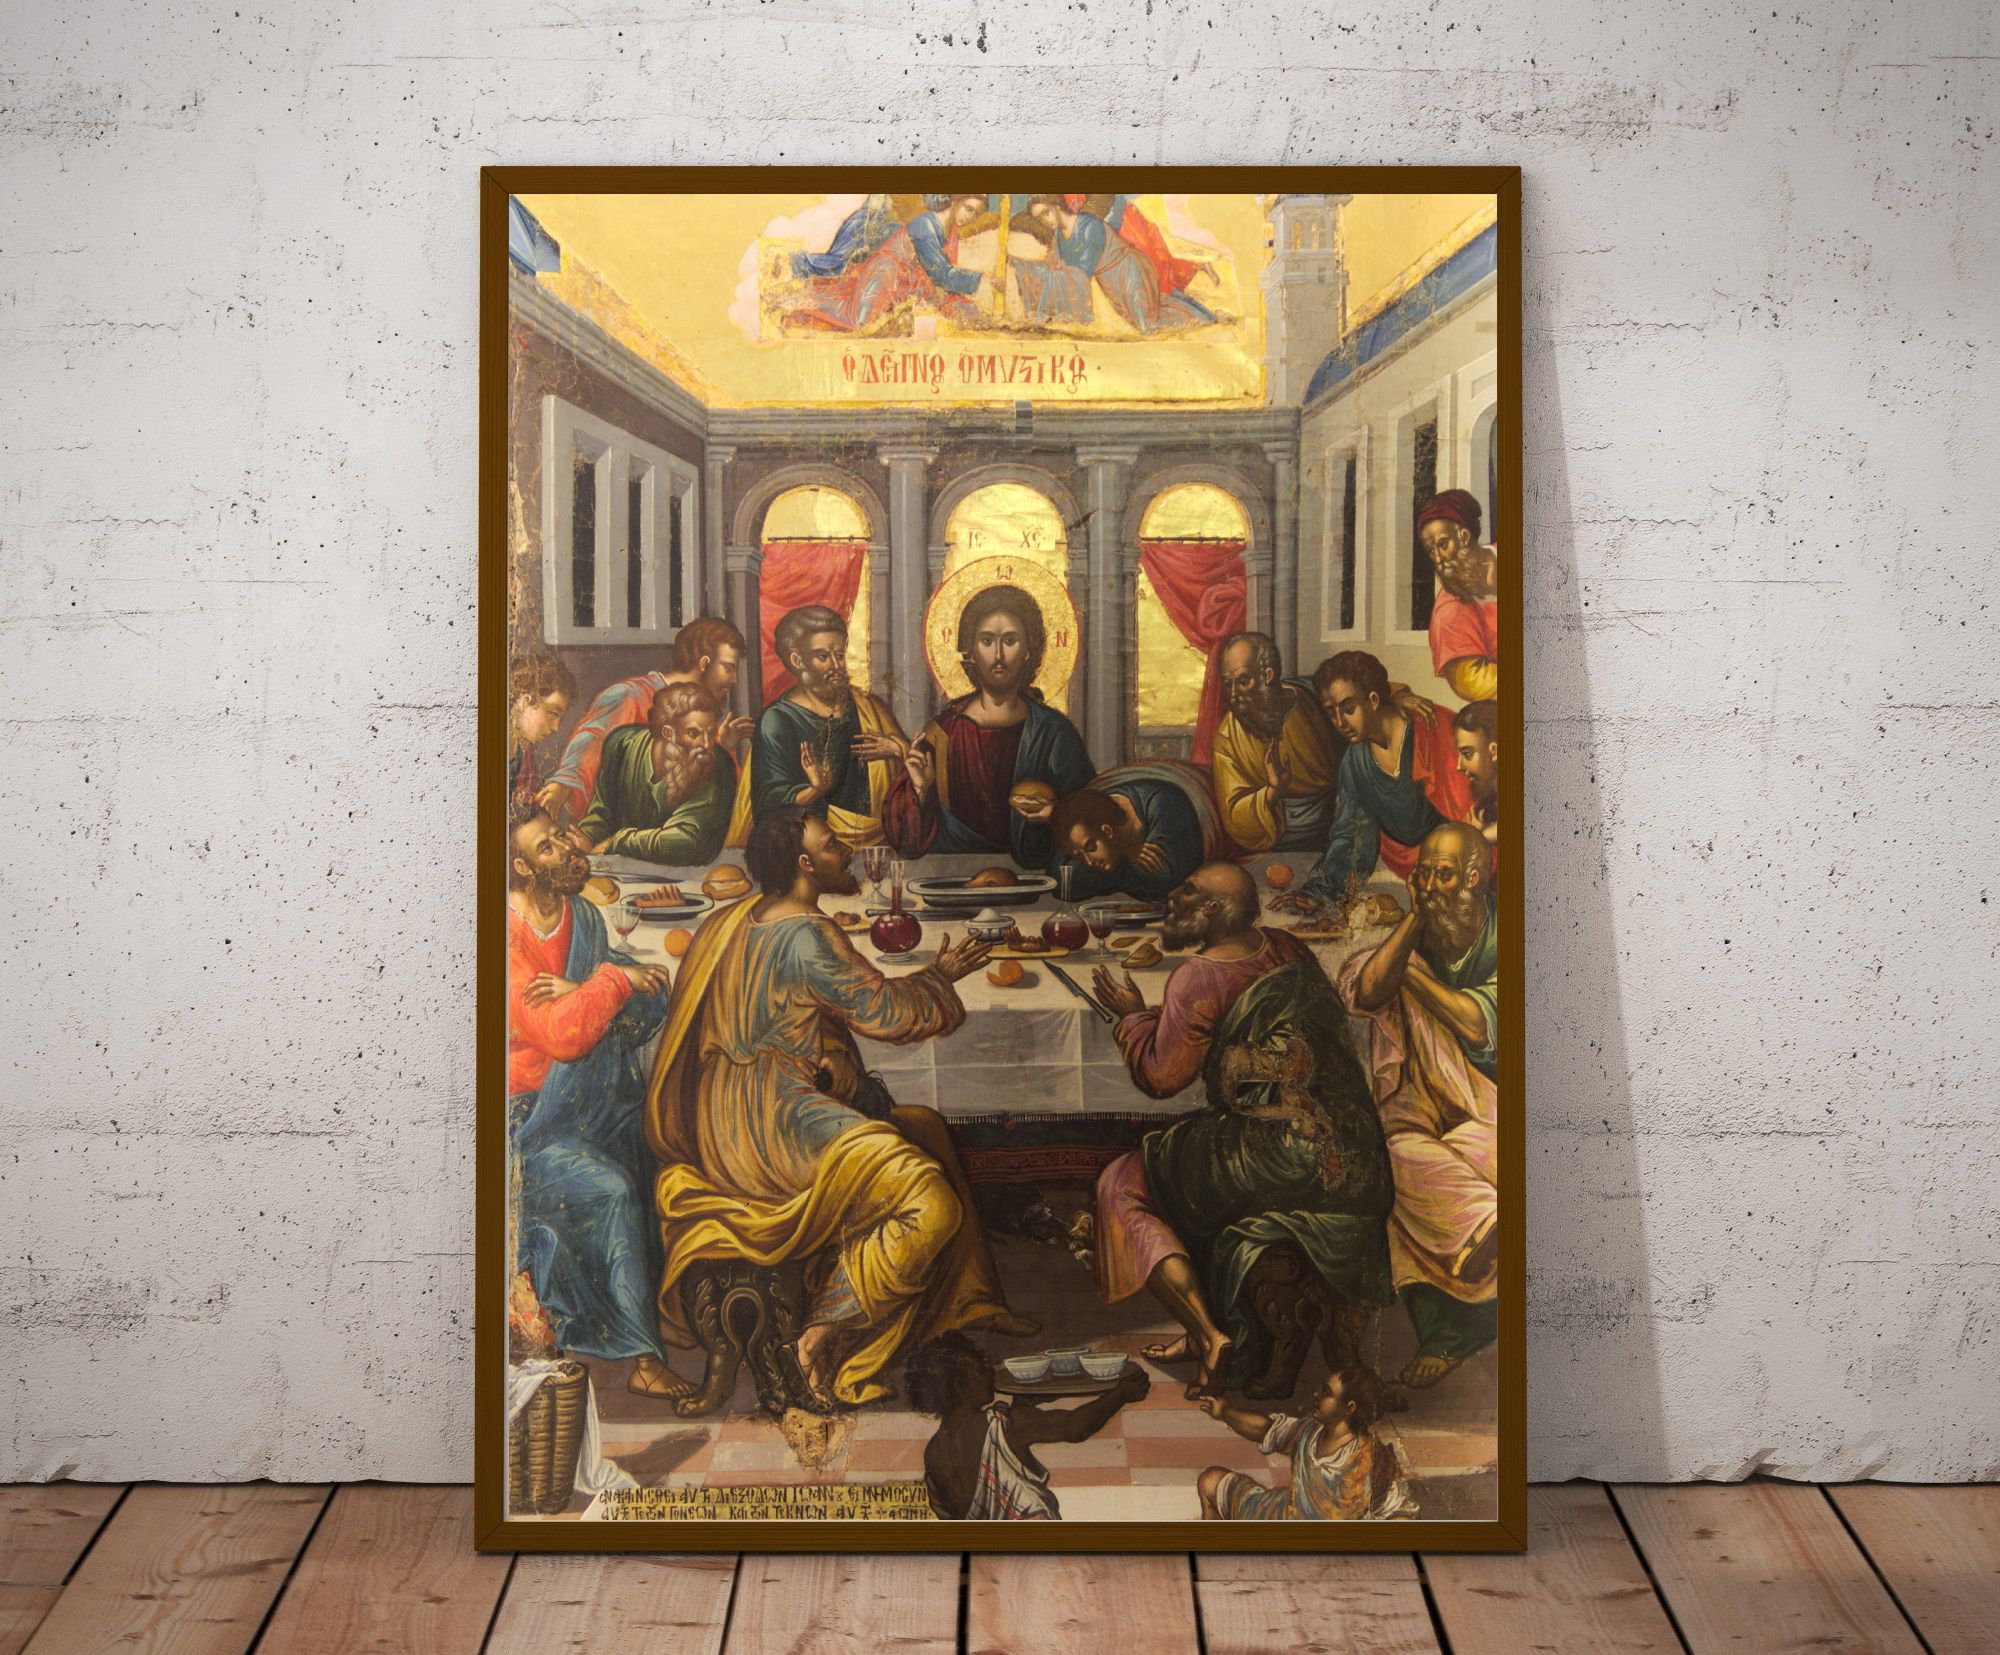 Wall of Spiritual Religious Eclectic - Etsy Art, Last Supper, Saints, Artworks, the Home Greek Christian Print, Paintings Decoration Orthodox